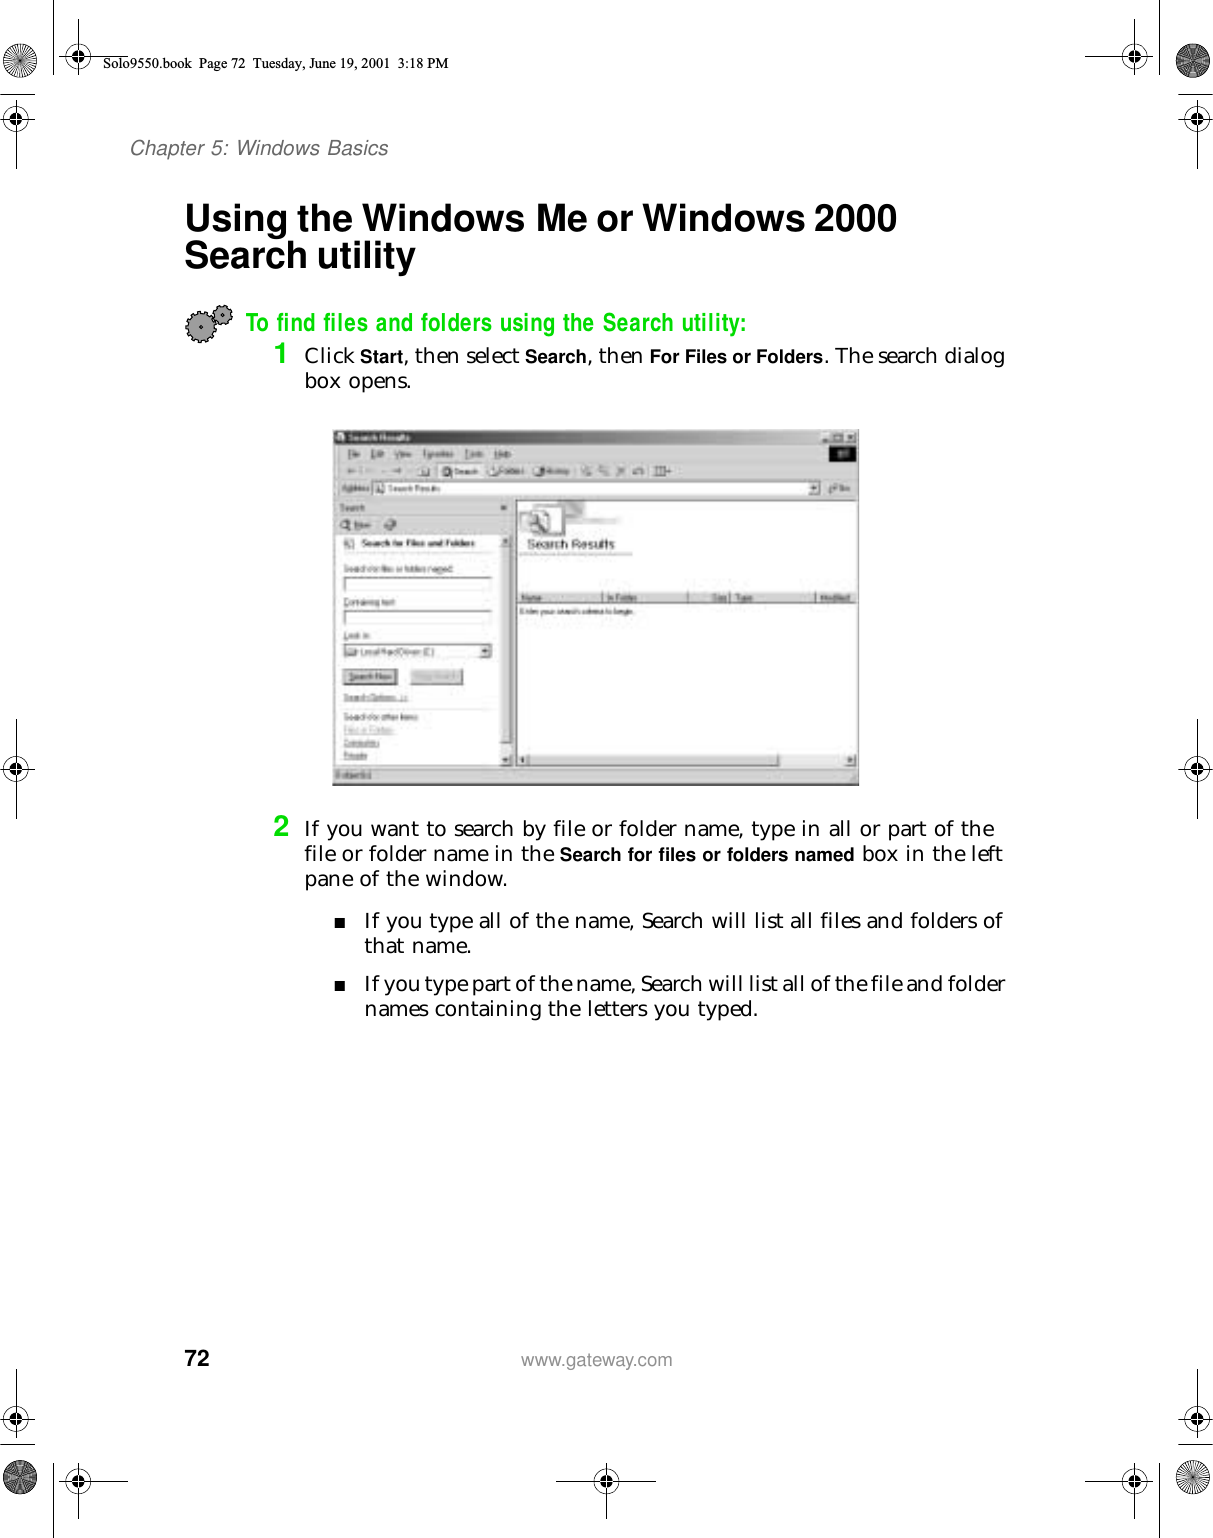 72Chapter 5: Windows Basicswww.gateway.comUsing the Windows Me or Windows 2000 Search utility To find files and folders using the Search utility:1Click Start, then select Search, then For Files or Folders. The search dialog box opens.2If you want to search by file or folder name, type in all or part of the file or folder name in the Search for files or folders named box in the left pane of the window.■If you type all of the name, Search will list all files and folders of that name.■If you type part of the name, Search will list all of the file and folder names containing the letters you typed.Solo9550.book Page 72 Tuesday, June 19, 2001 3:18 PM